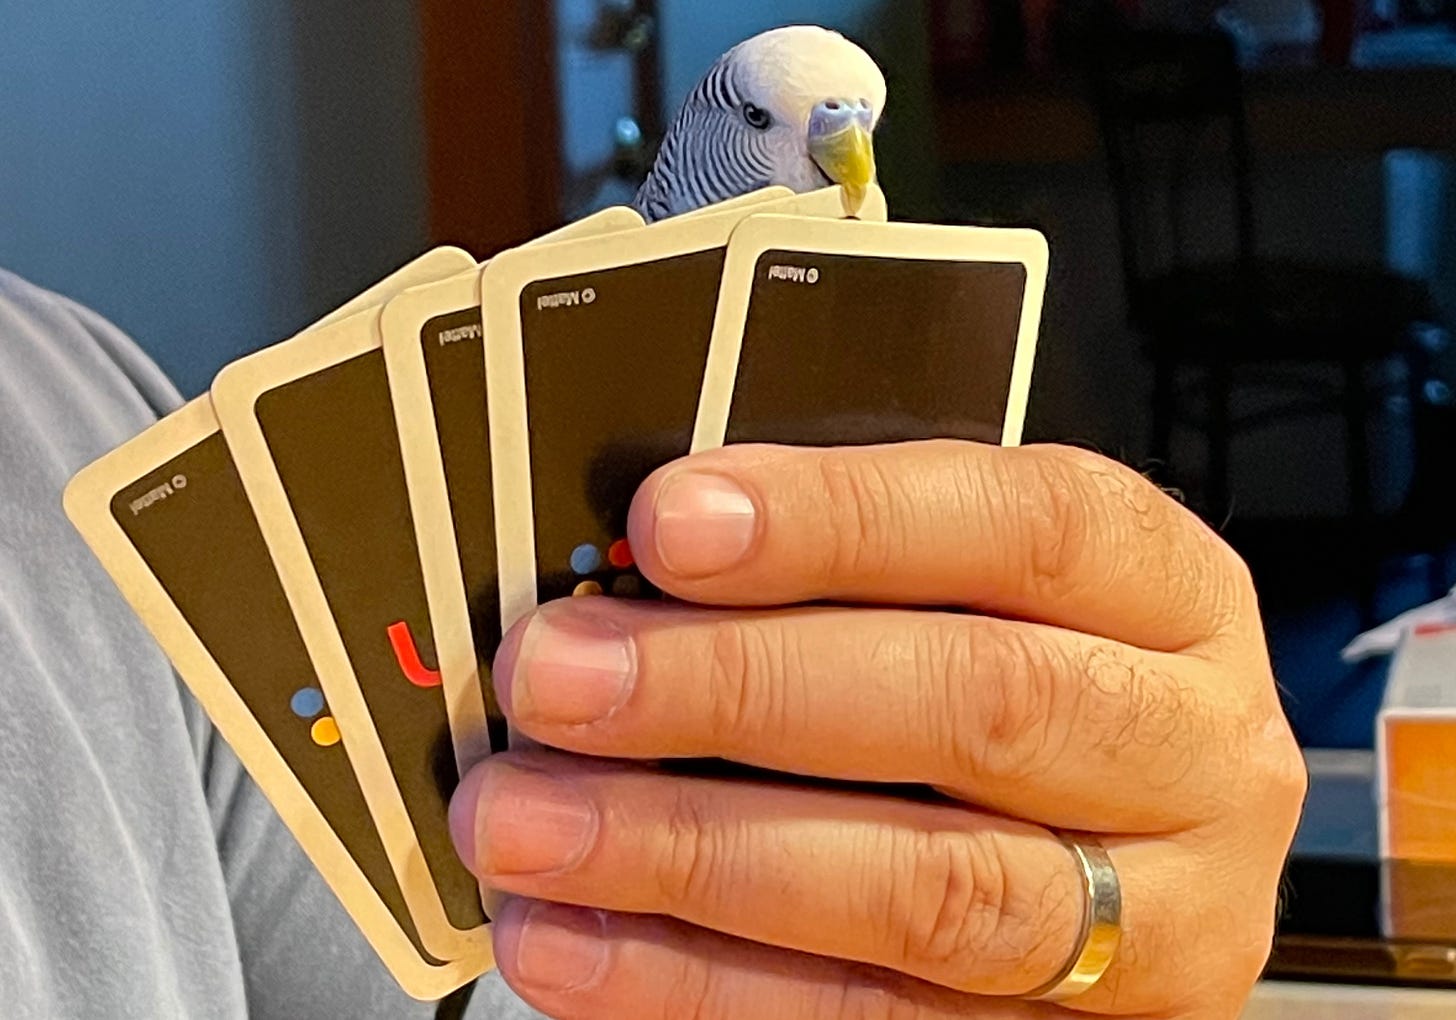 A man wearing a wedding ring holding six Uno playing cards, one of which is being nibbled on by Yoshi, a grey budgie with a white face